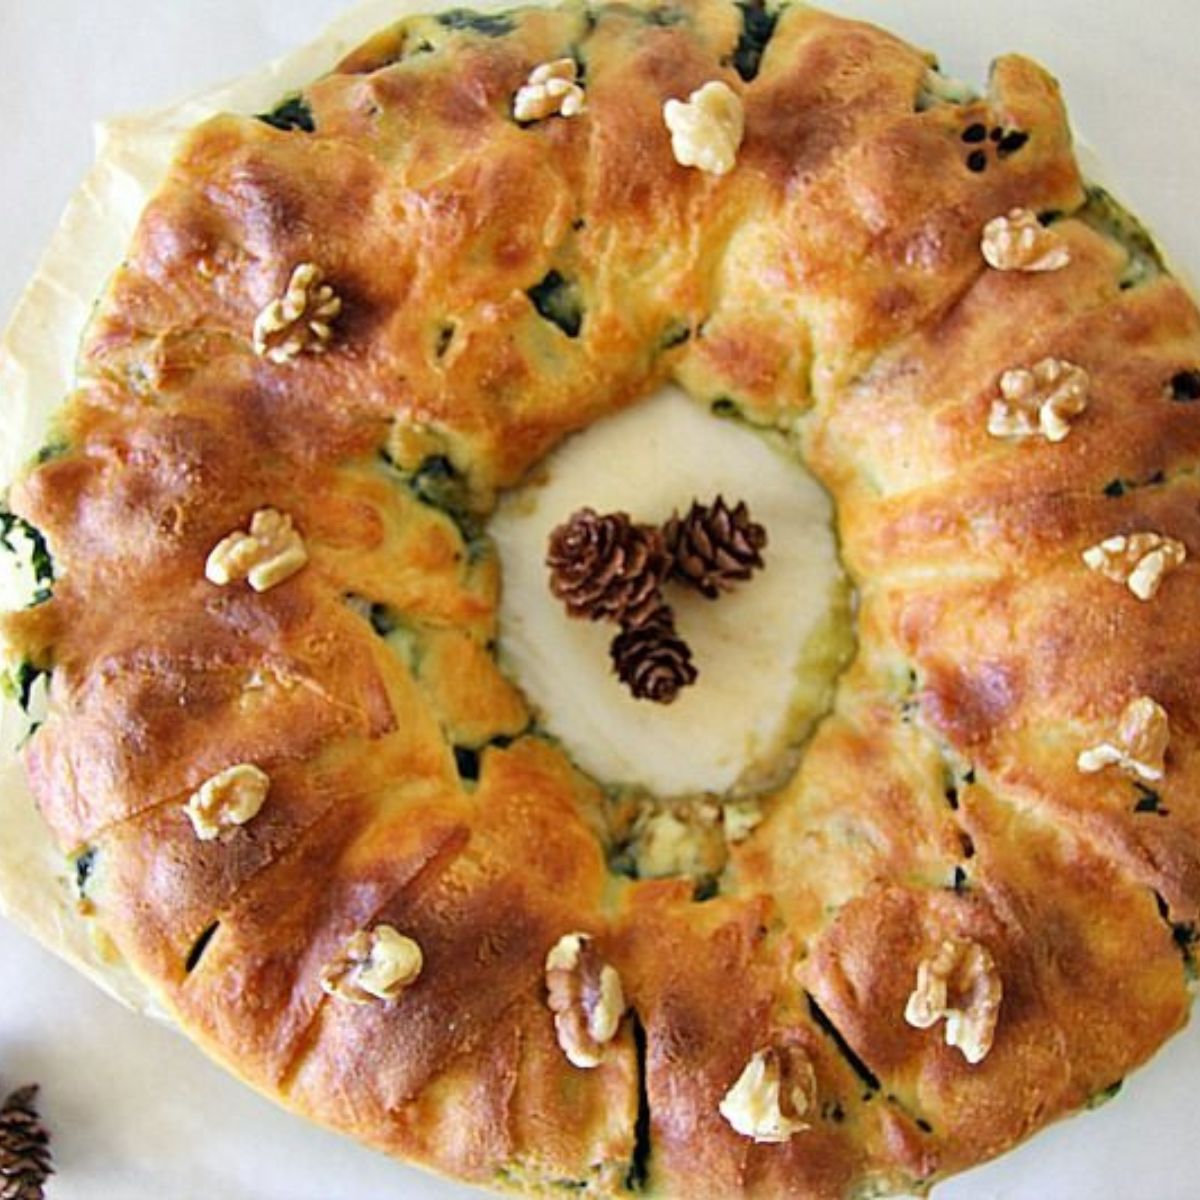 A wreath made with spinach and walnuts.